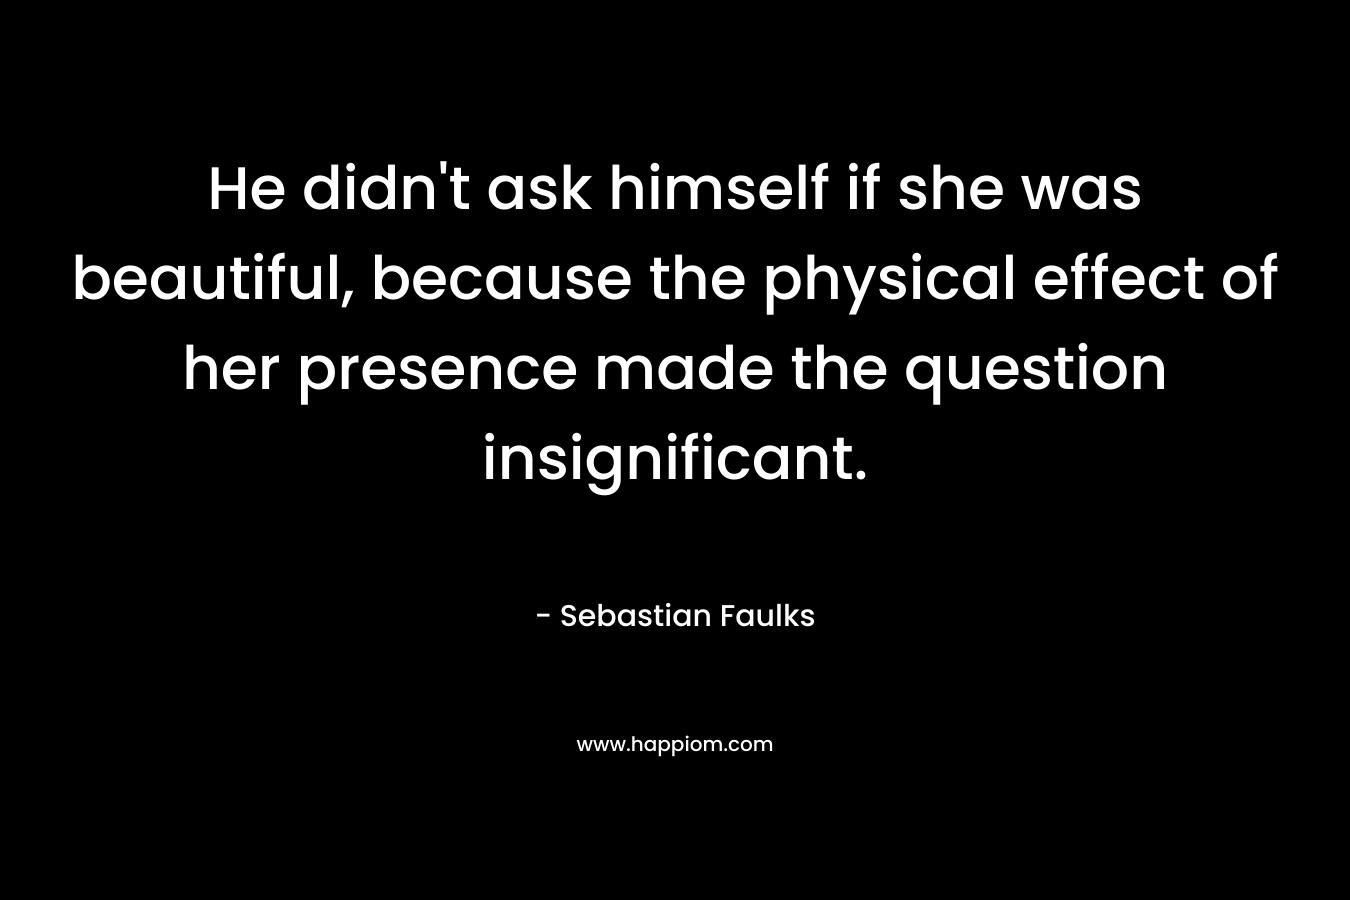 He didn’t ask himself if she was beautiful, because the physical effect of her presence made the question insignificant. – Sebastian Faulks